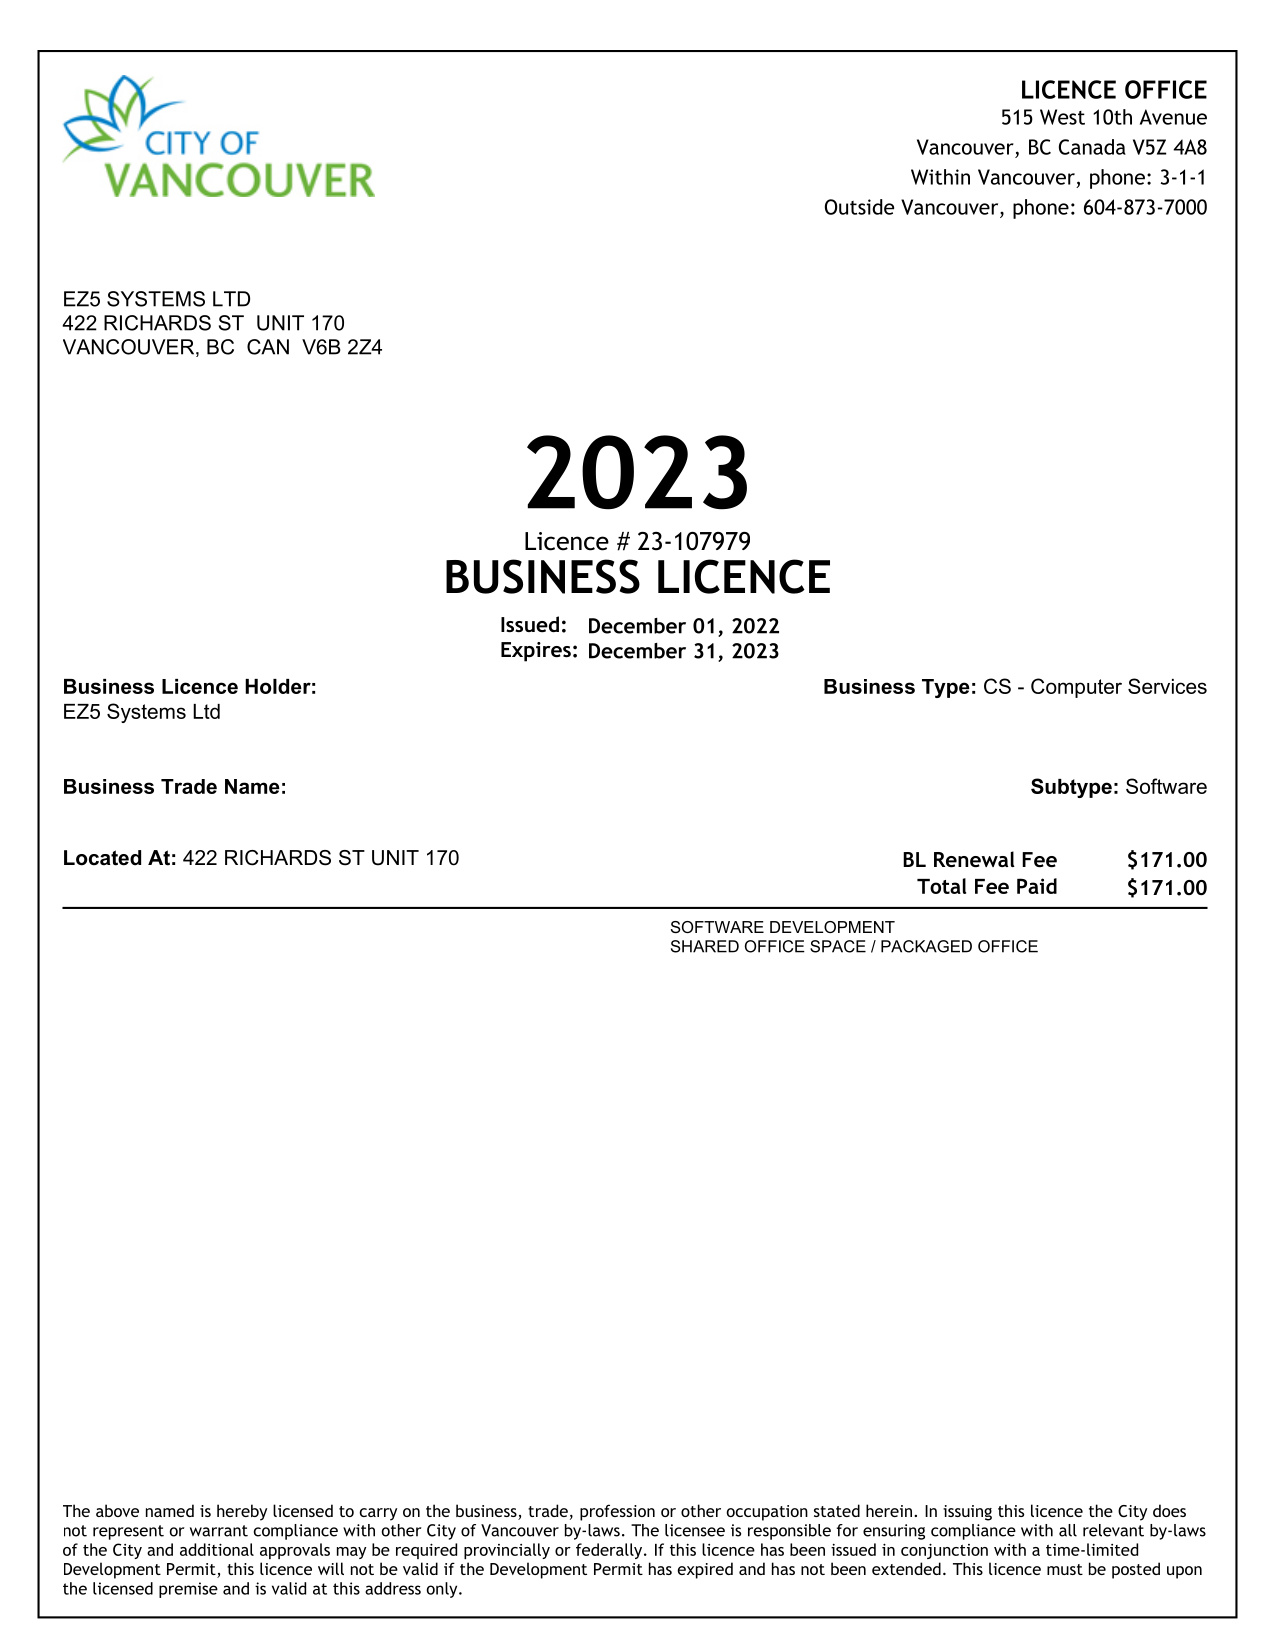 EZ5 Systems - Business License